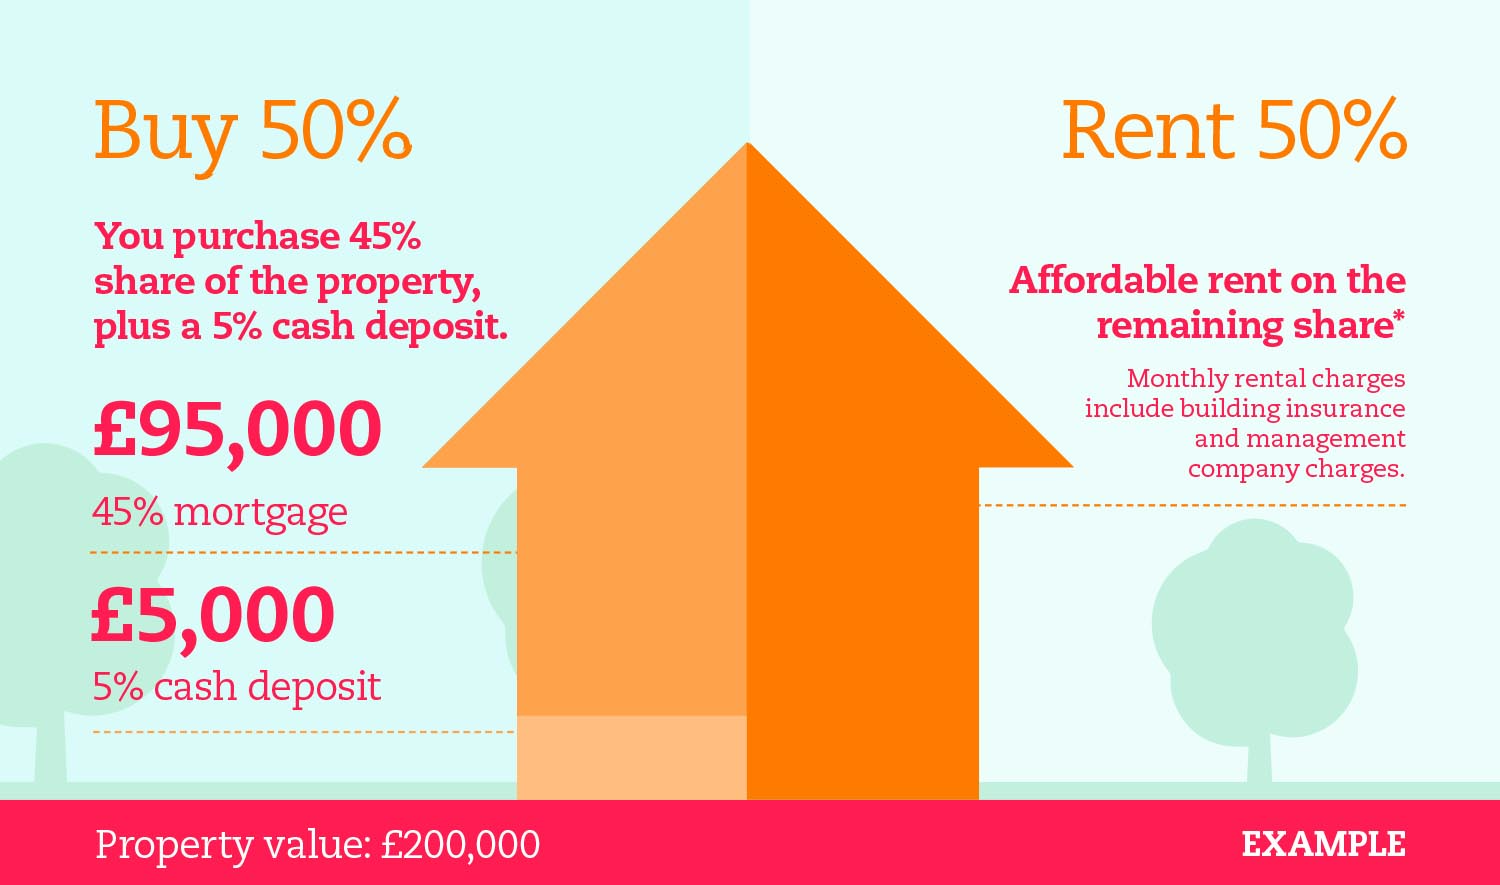 Shared Ownership explained - buy 50% and rent 50%